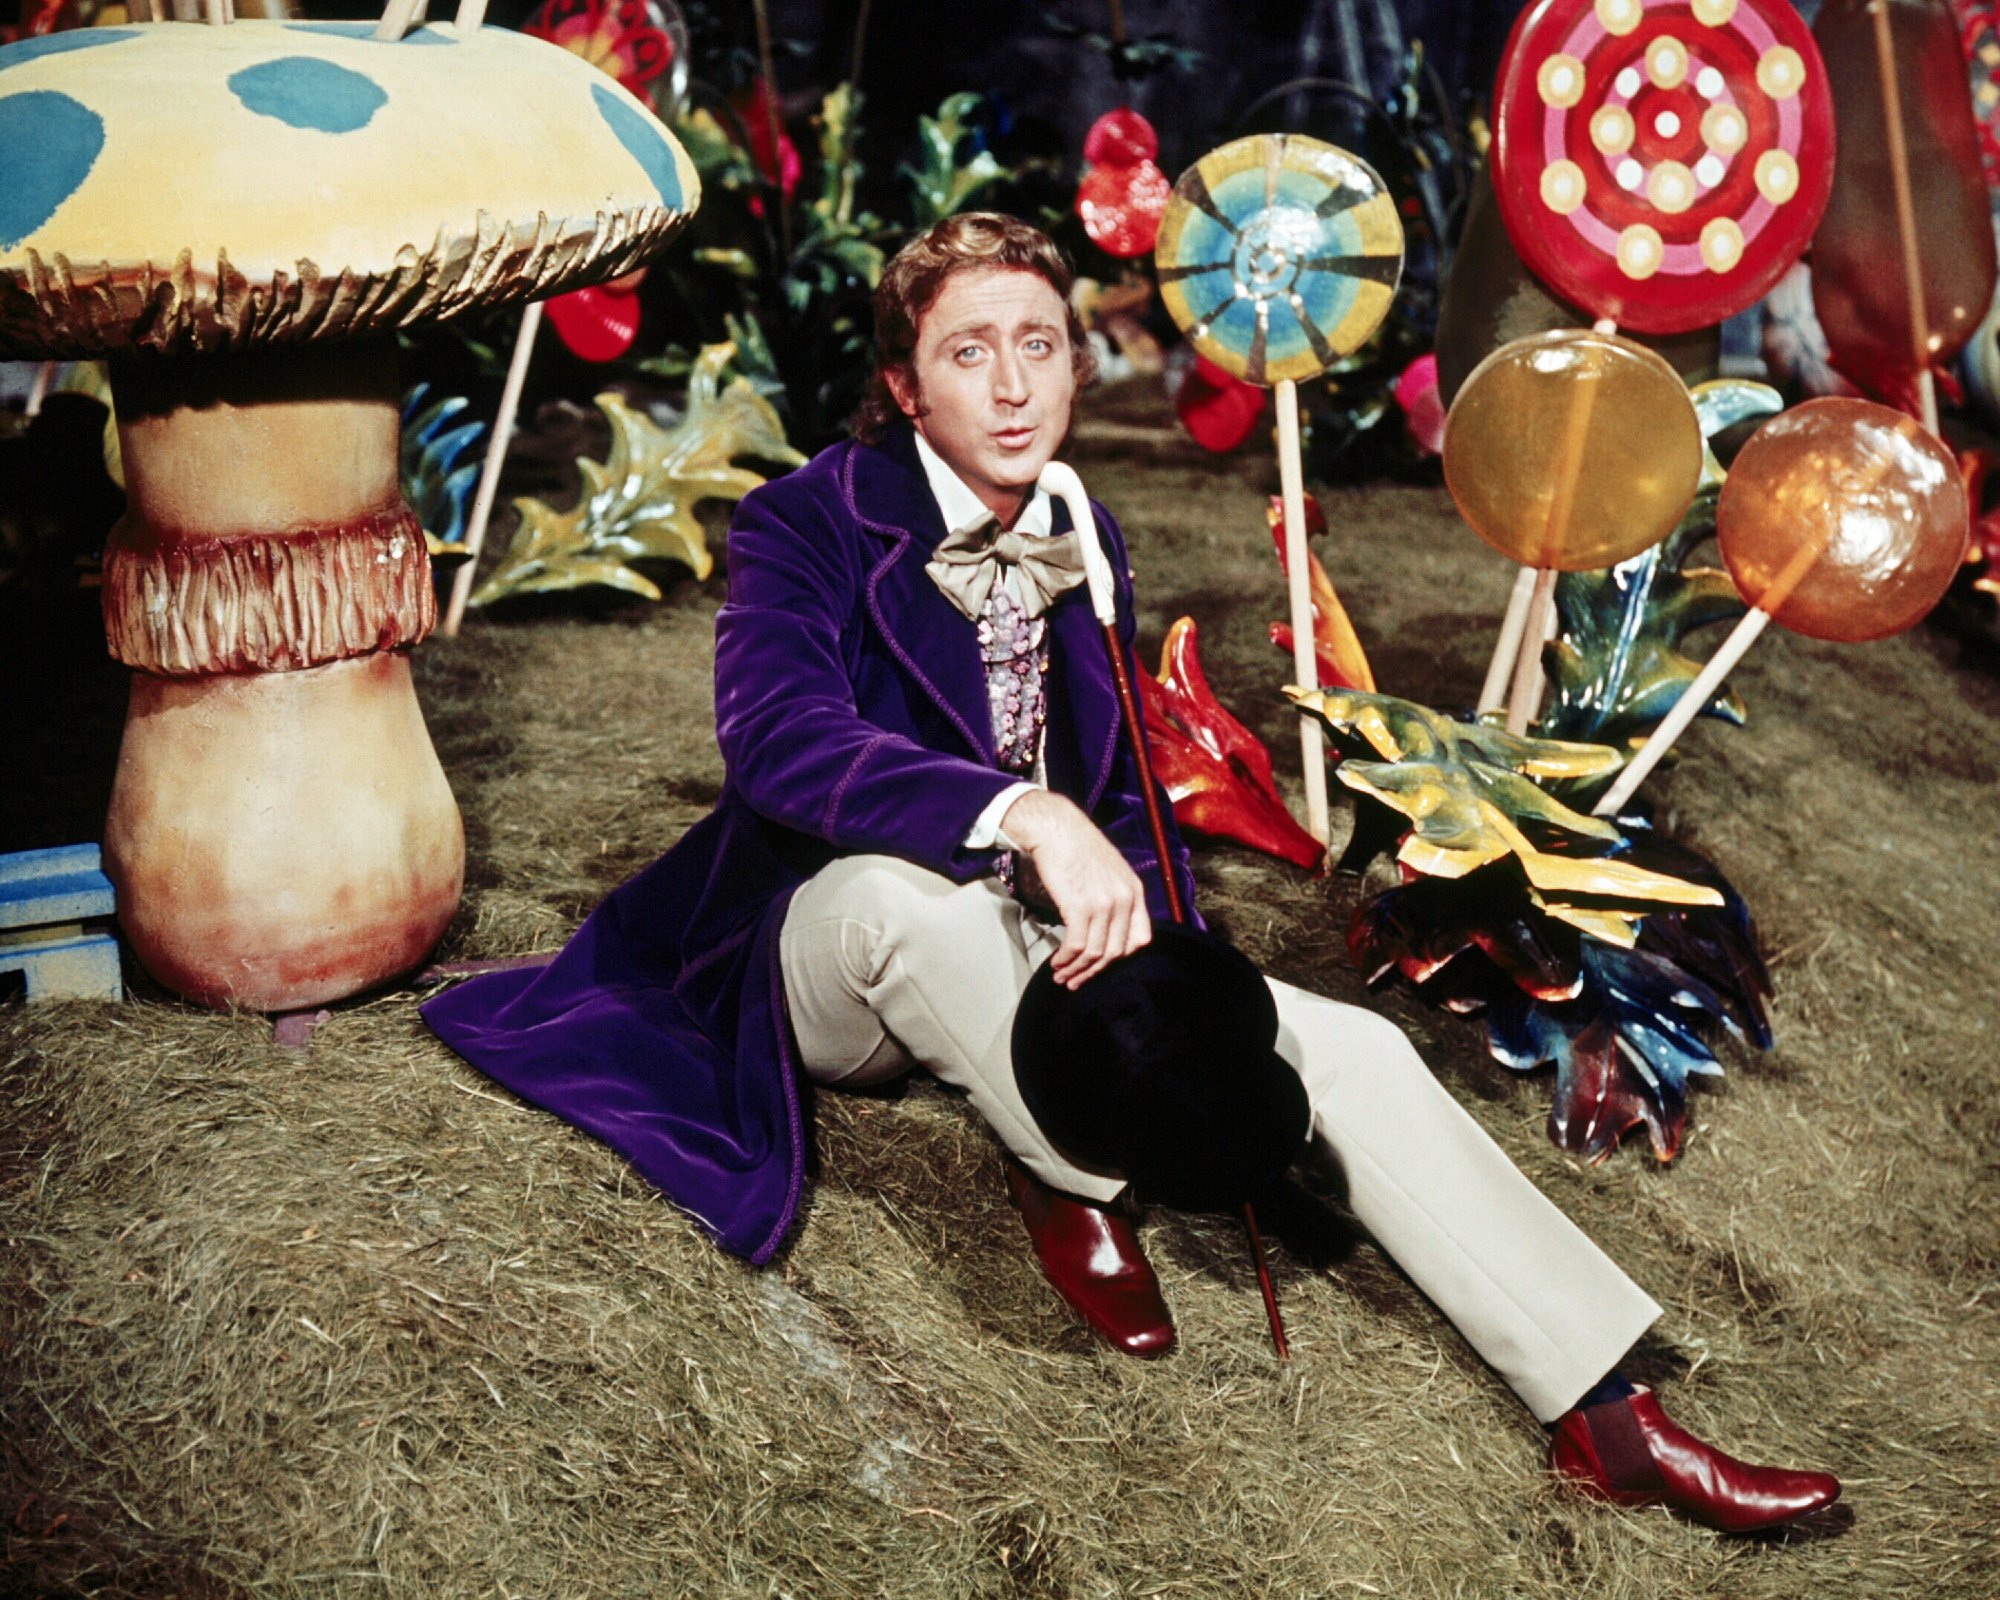 Gene Wilder as Willy Wonka in 'Willy Wonka & the Chocolate Factory' before Johnny Depp iteration